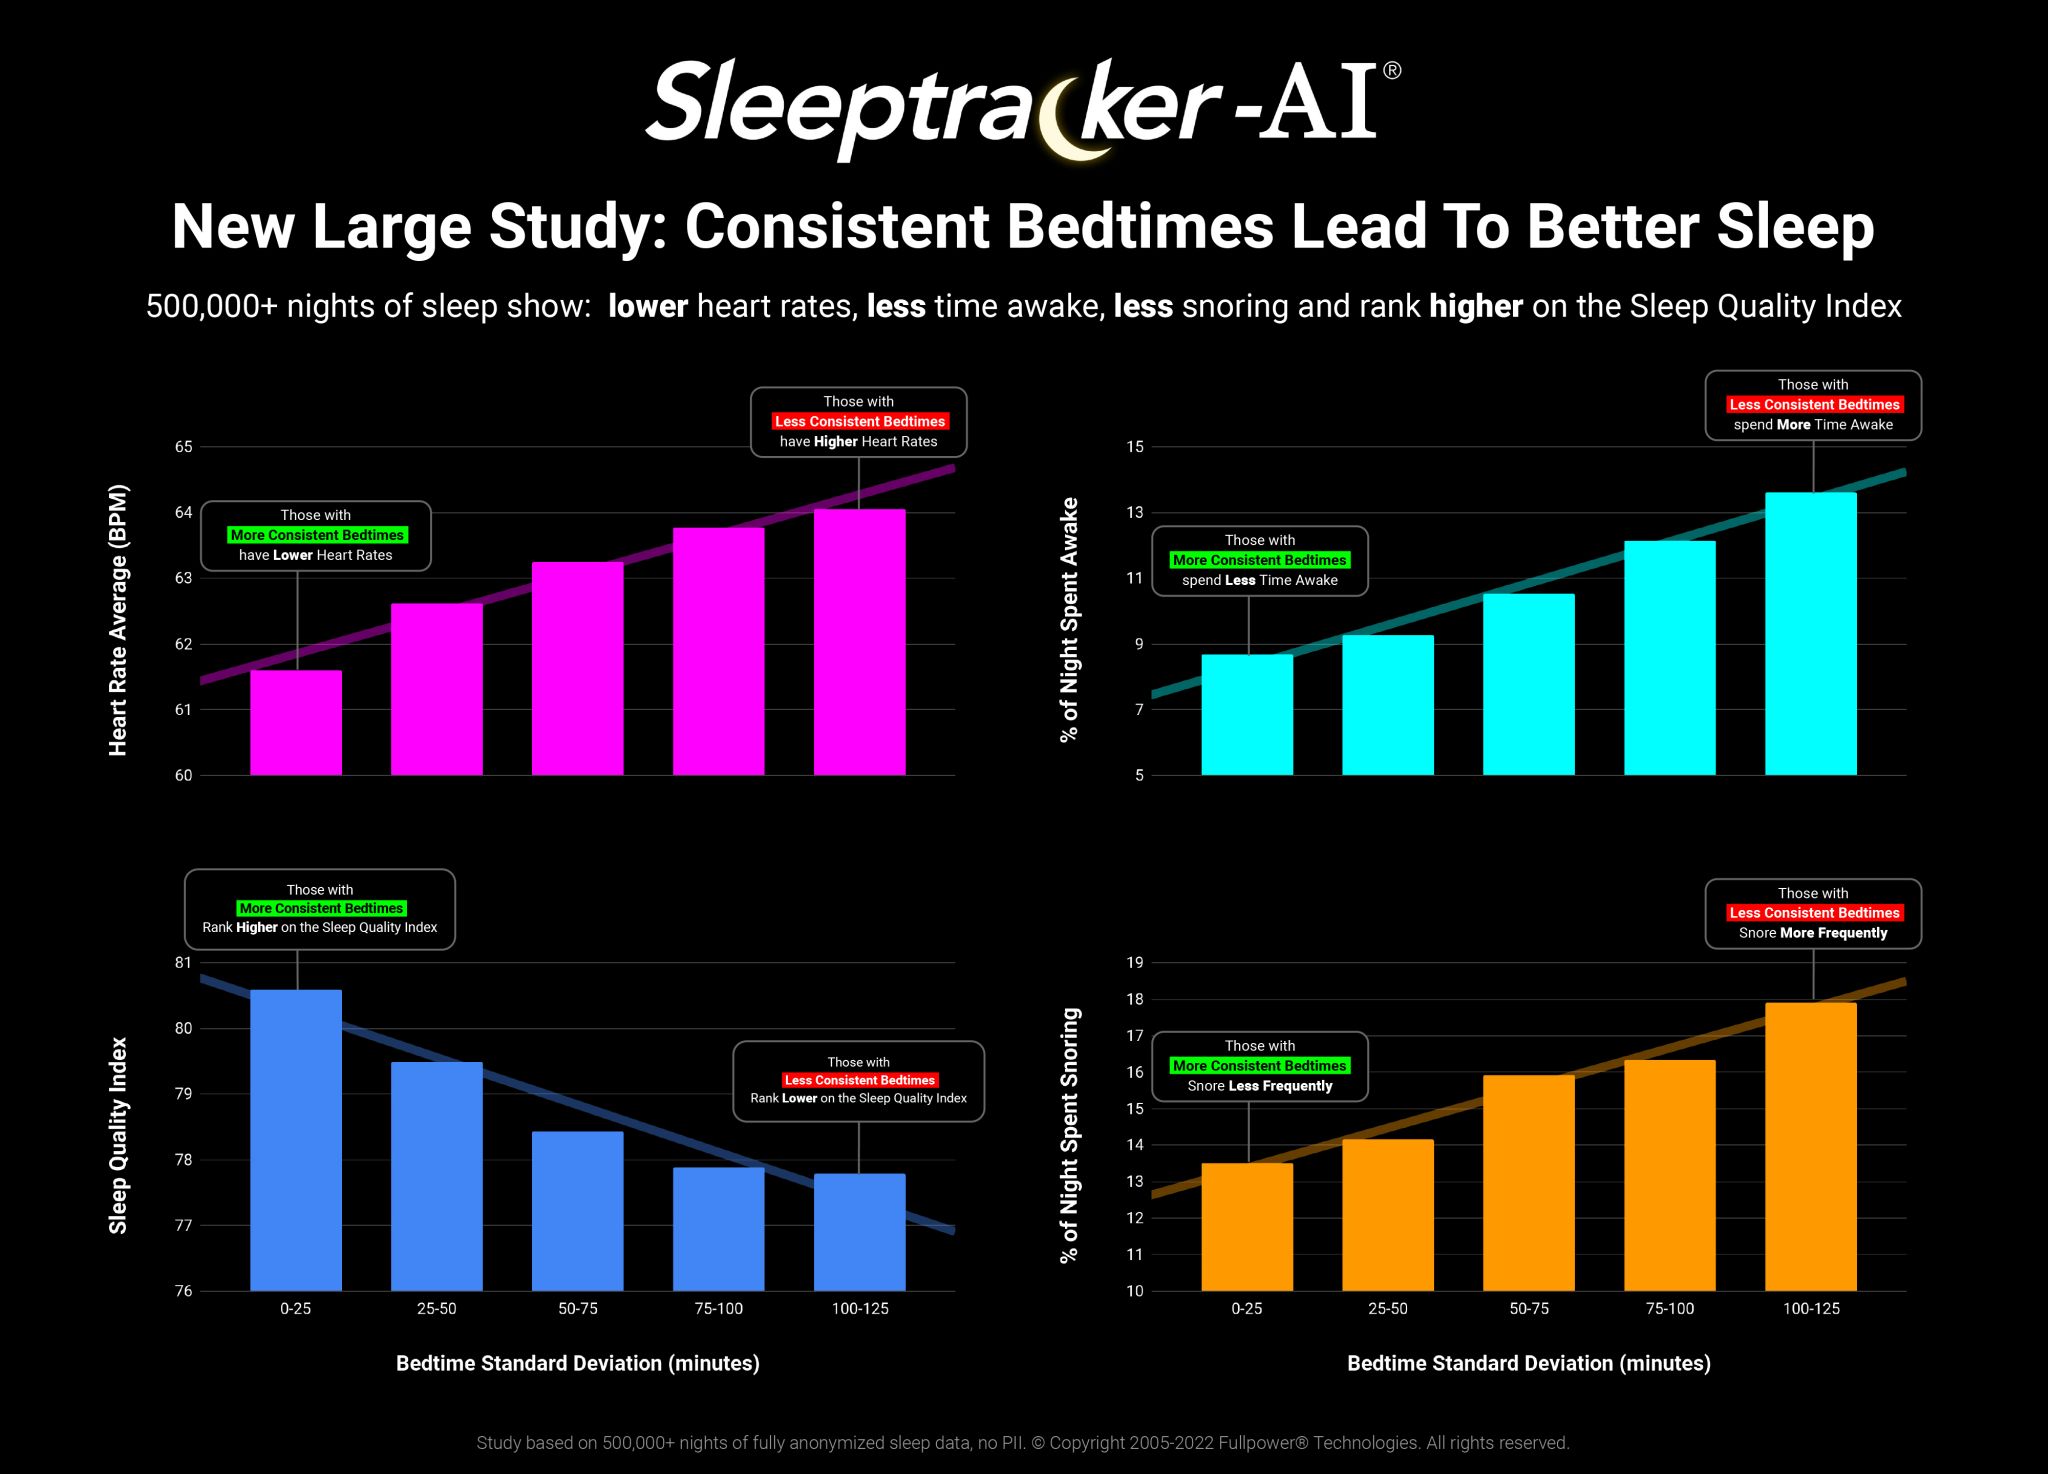 New Large Study: Consistent Bedtimes Lead To Better Sleep